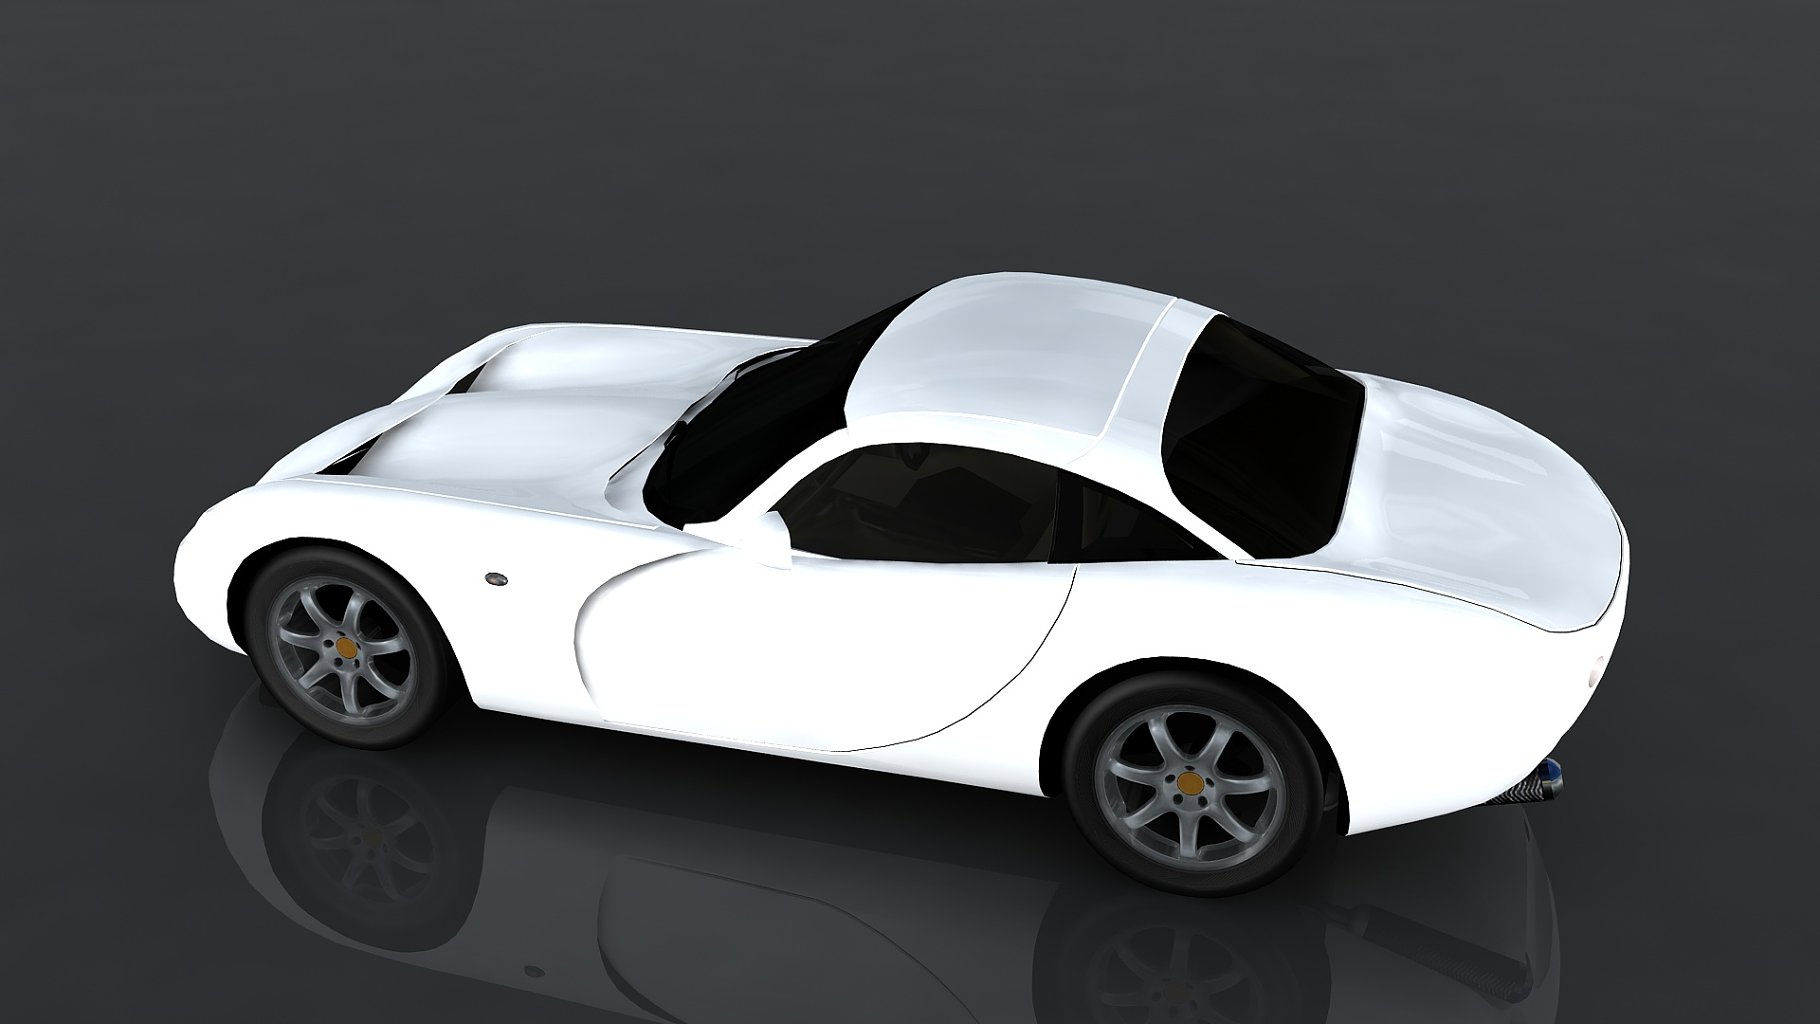 Mockup of a white car on a dark gray background from above.